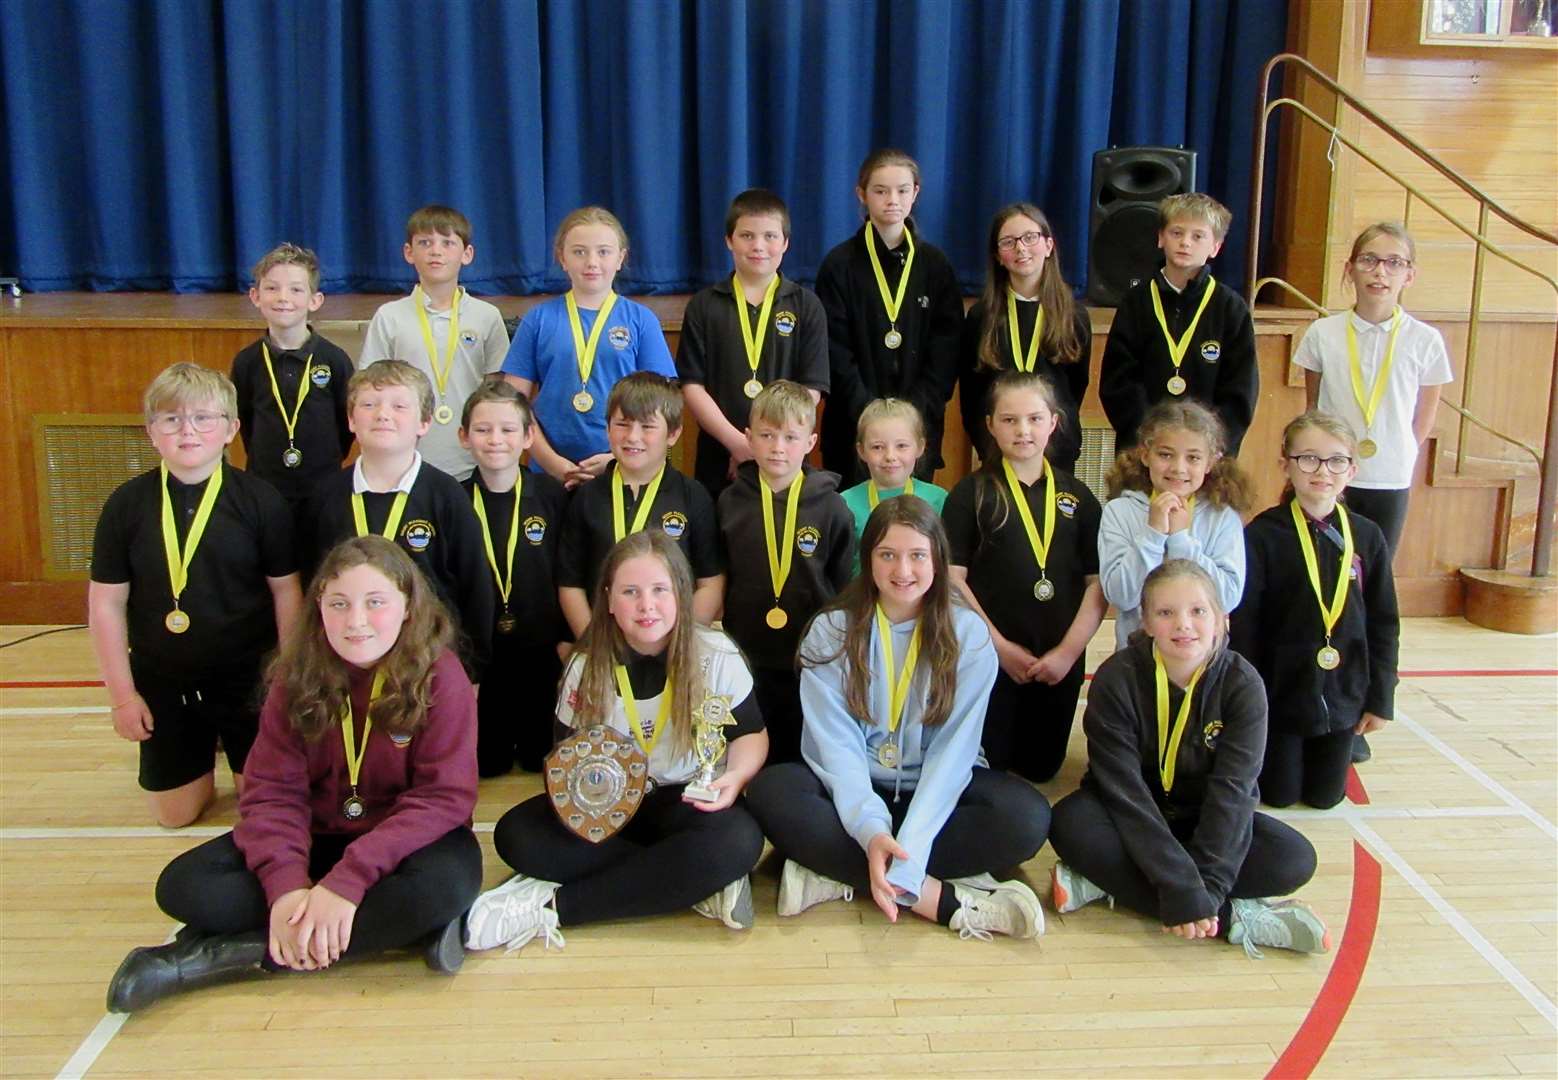 Accelerated Reading class winners for ‘most improved scores’ and ‘most words read’. Overall school winners for the year were Sophie Polson and Alexander Smith.